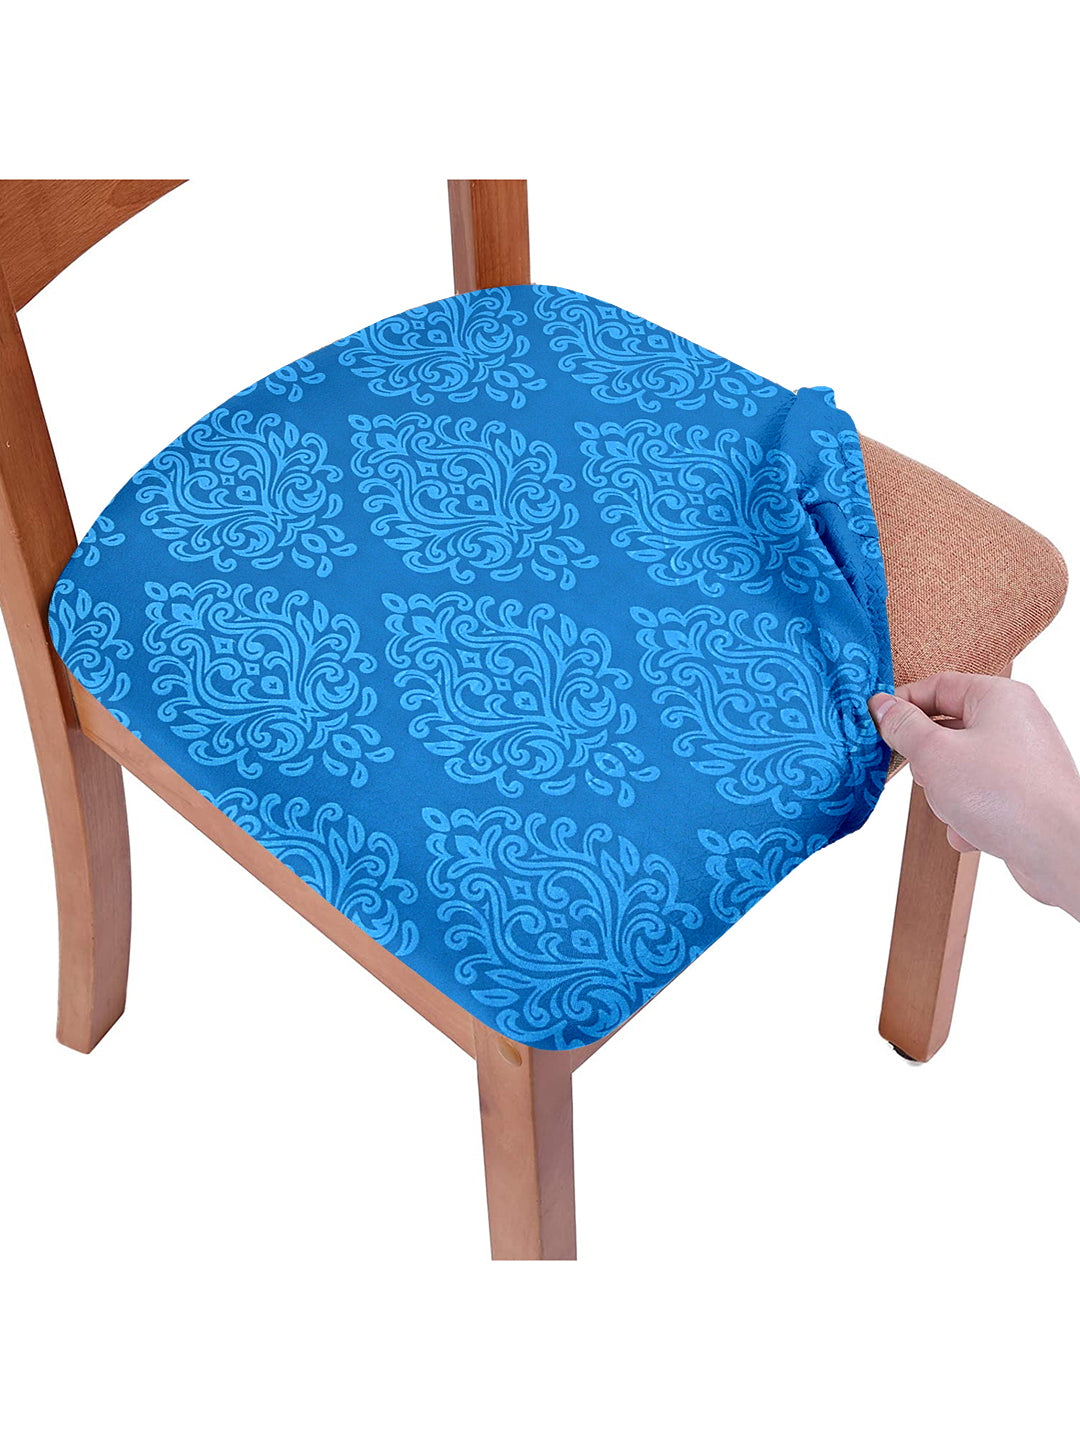 Stretchable Ethnic Printed Non Slip Chair Pad Cover Pack of 6- Navy Blue